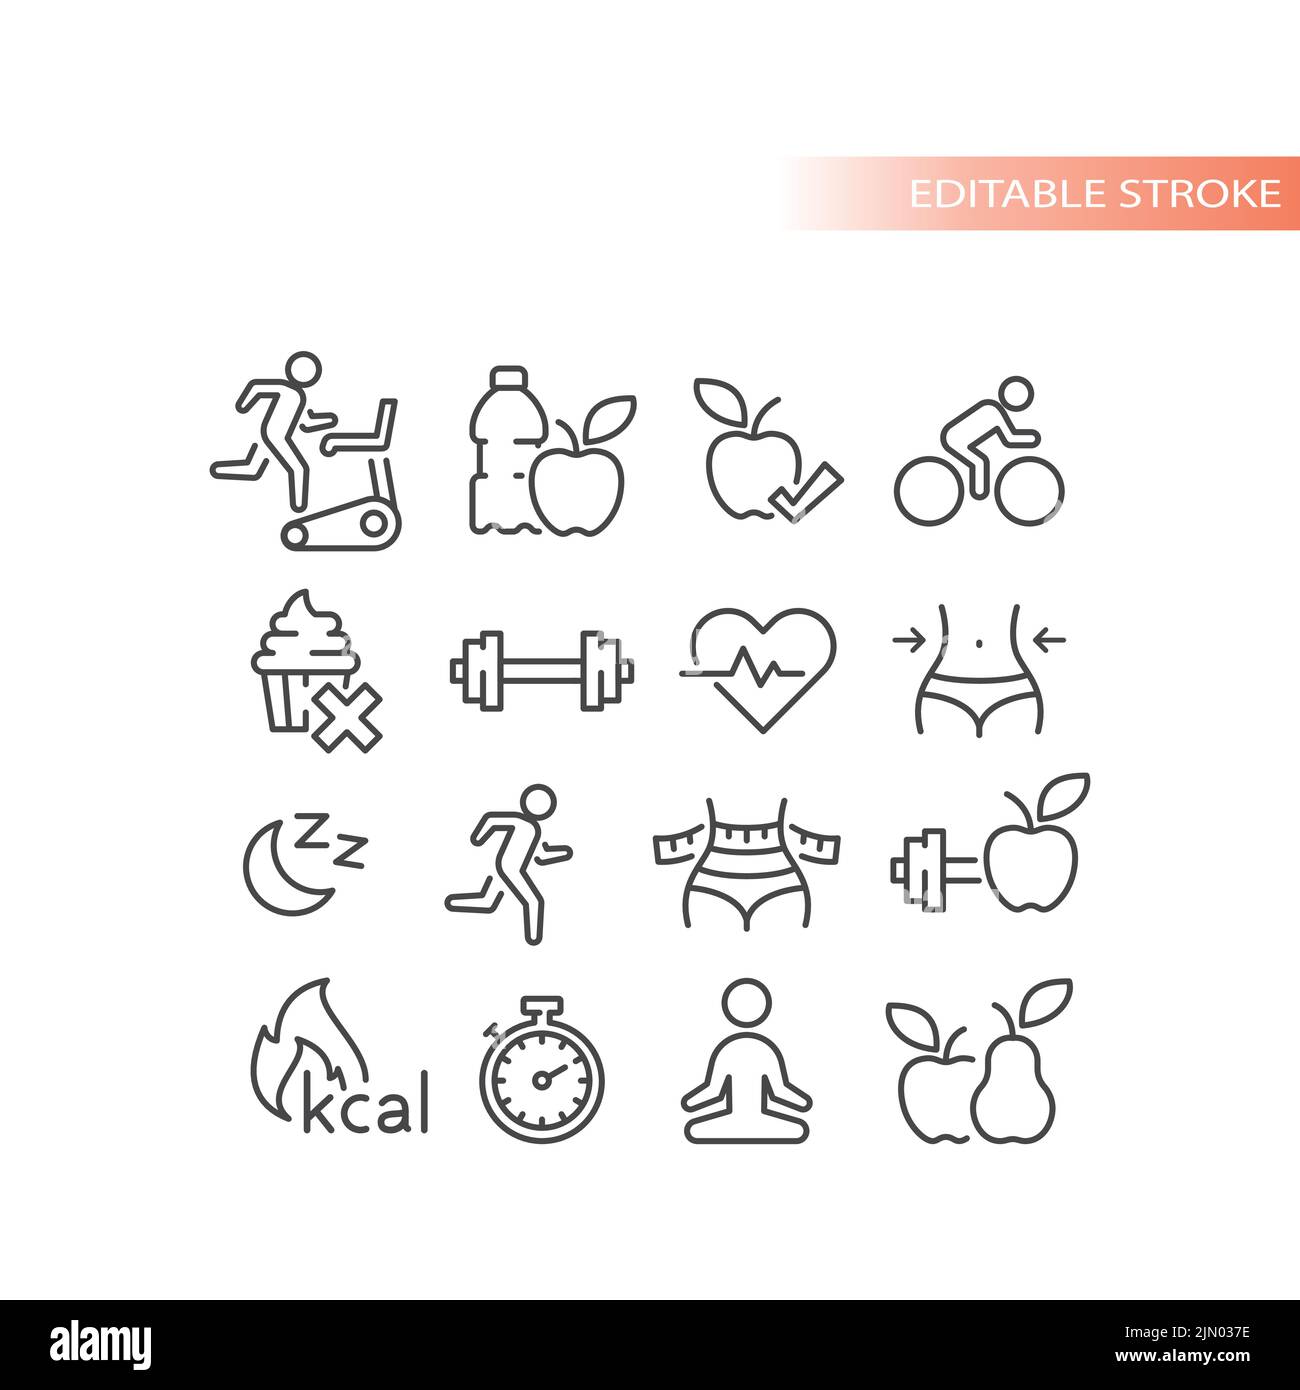 Workout and exercising vector icon set. Fitness, weight loss and healthy eating and lifestyle outlined icons. Stock Vector